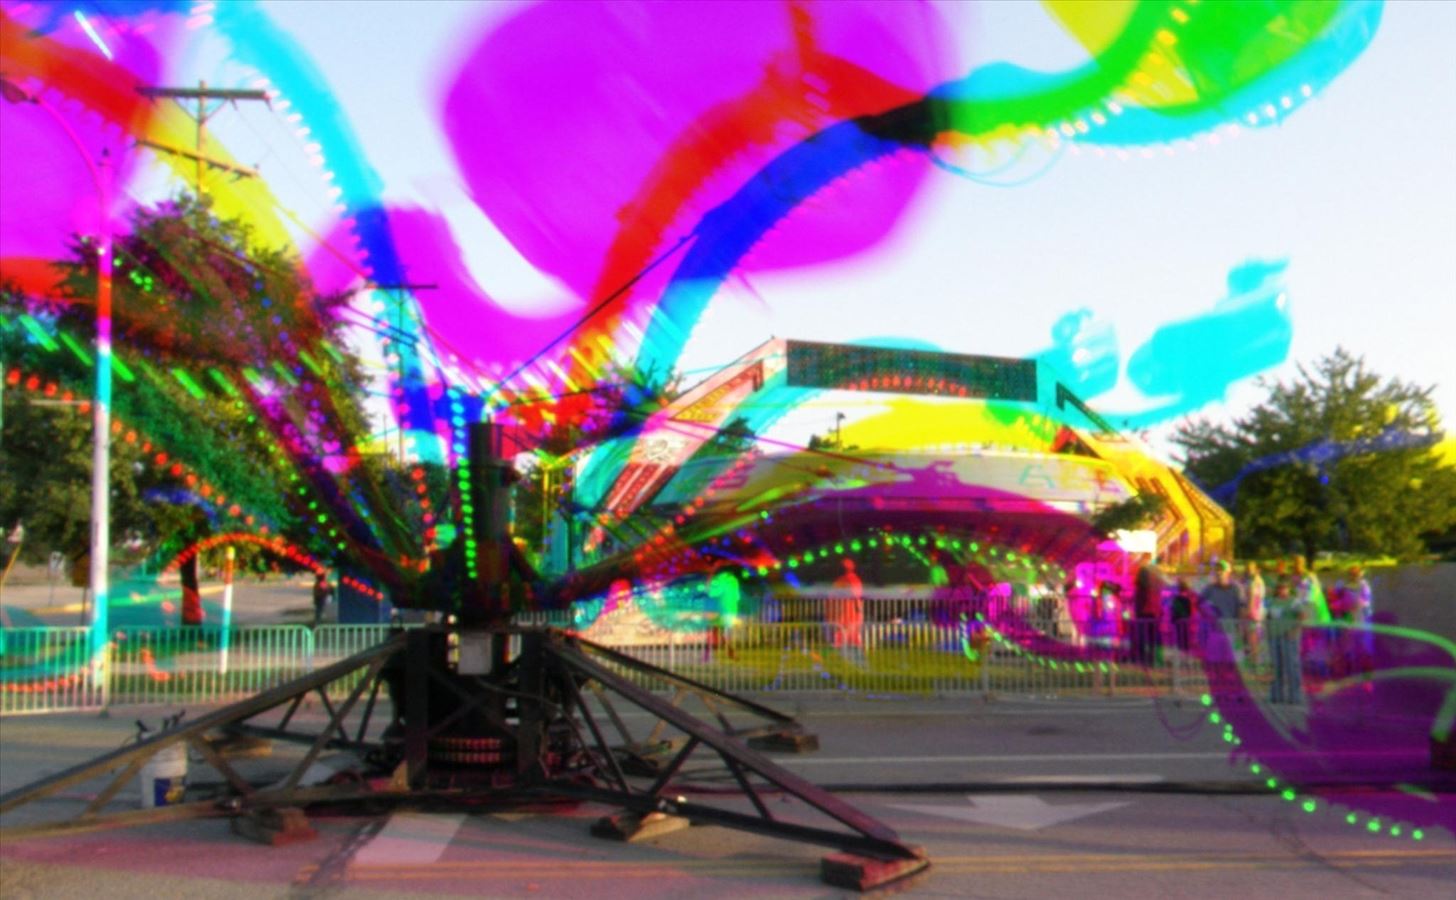 How to Use the Harris Shutter Effect to Get Crazy, Colorful Action Photos